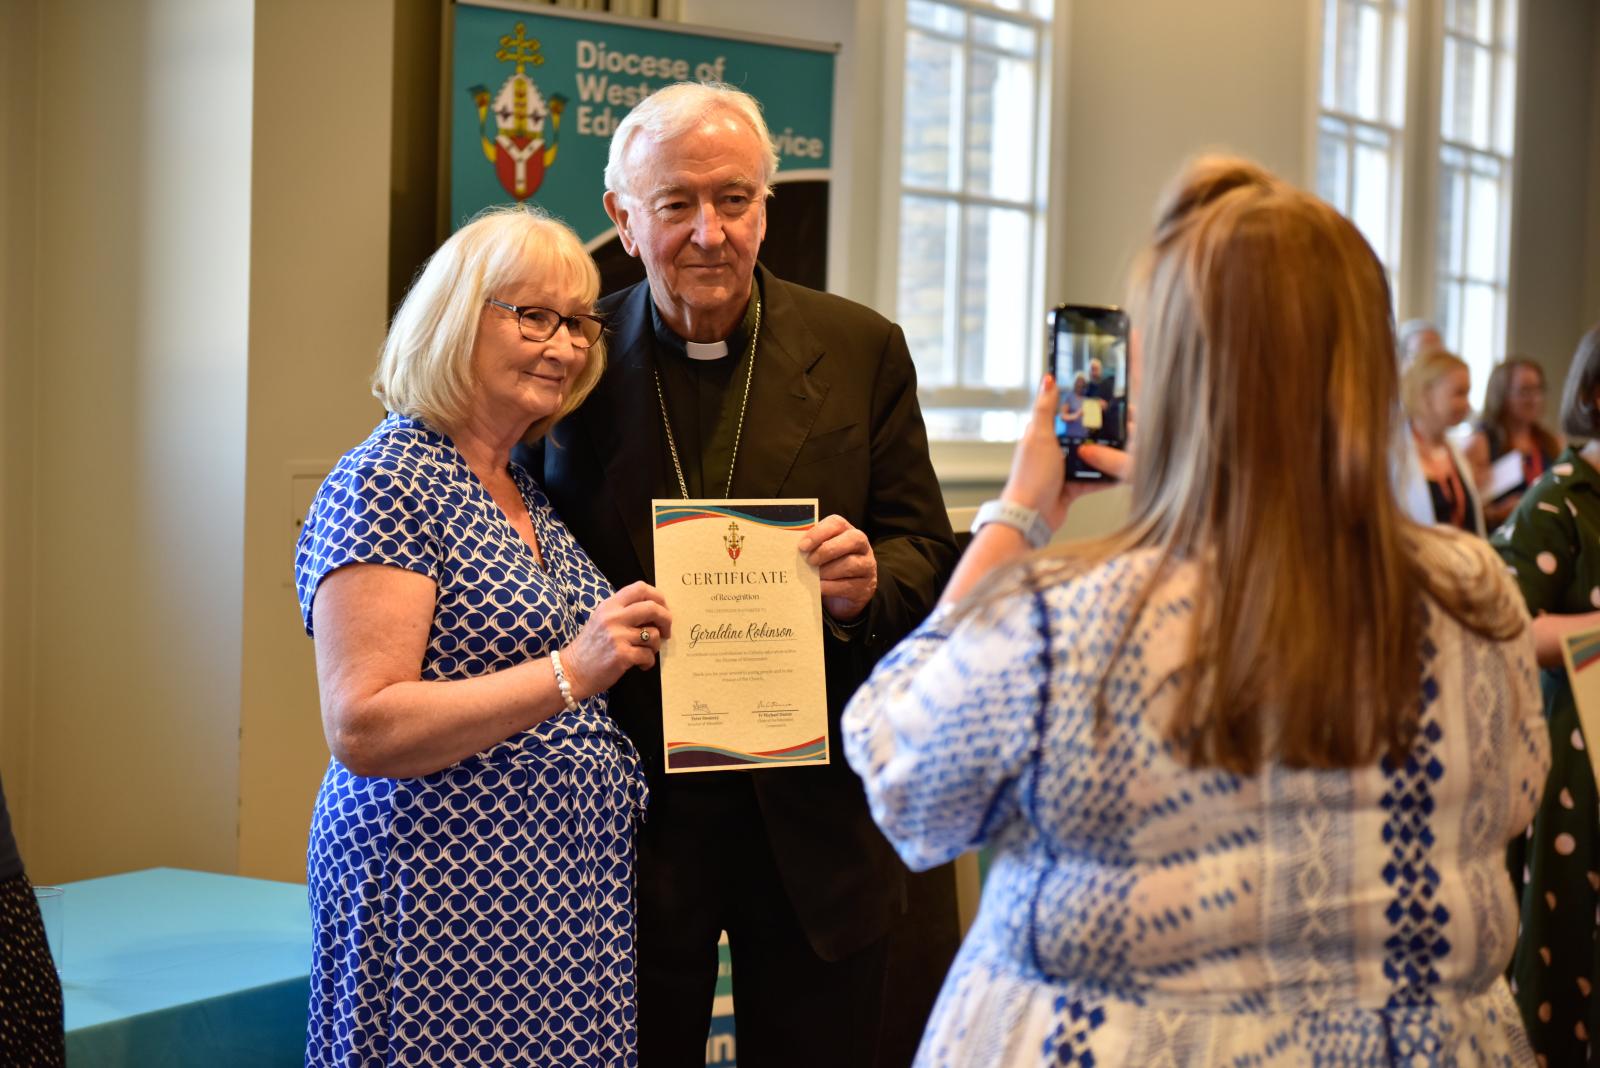 Cardinal leads celebrations for service to education - Diocese of Westminster